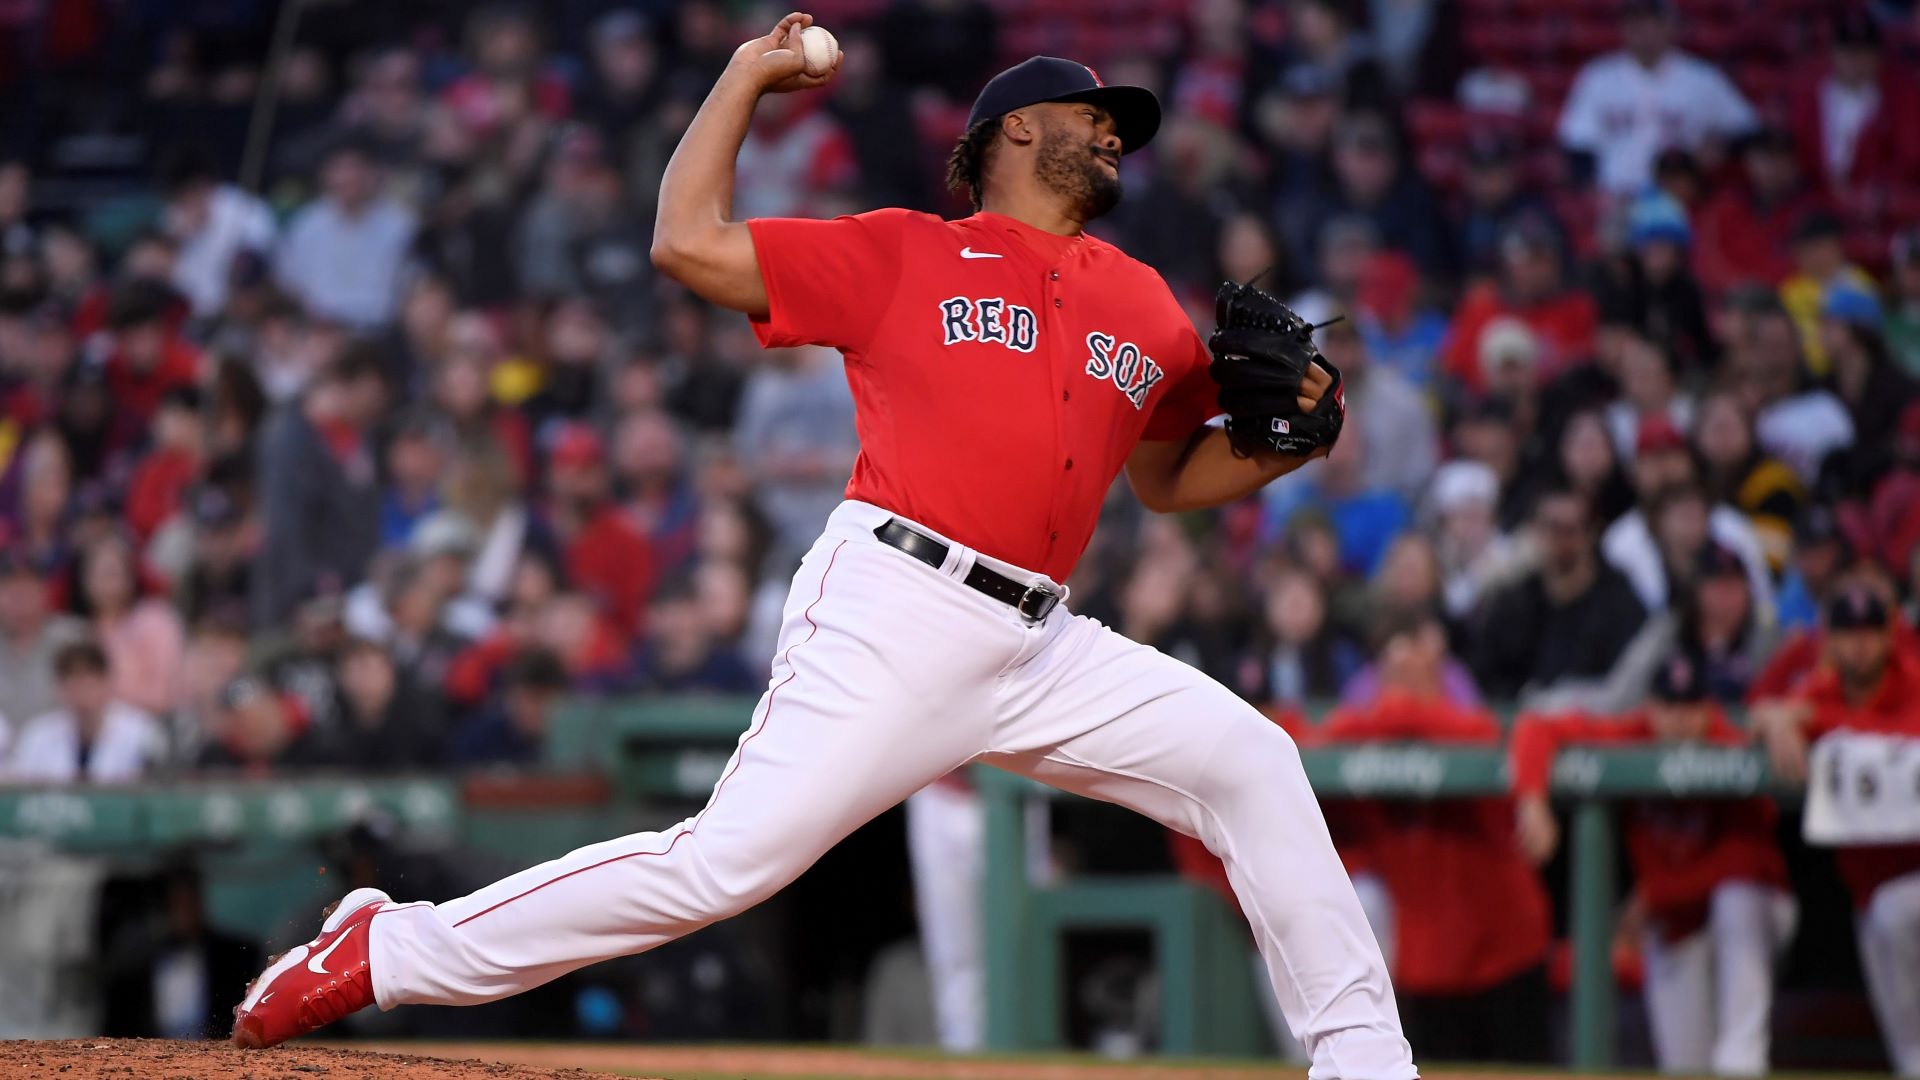 Kenley Jansen Made Understandable Mistake Before Red Sox Win